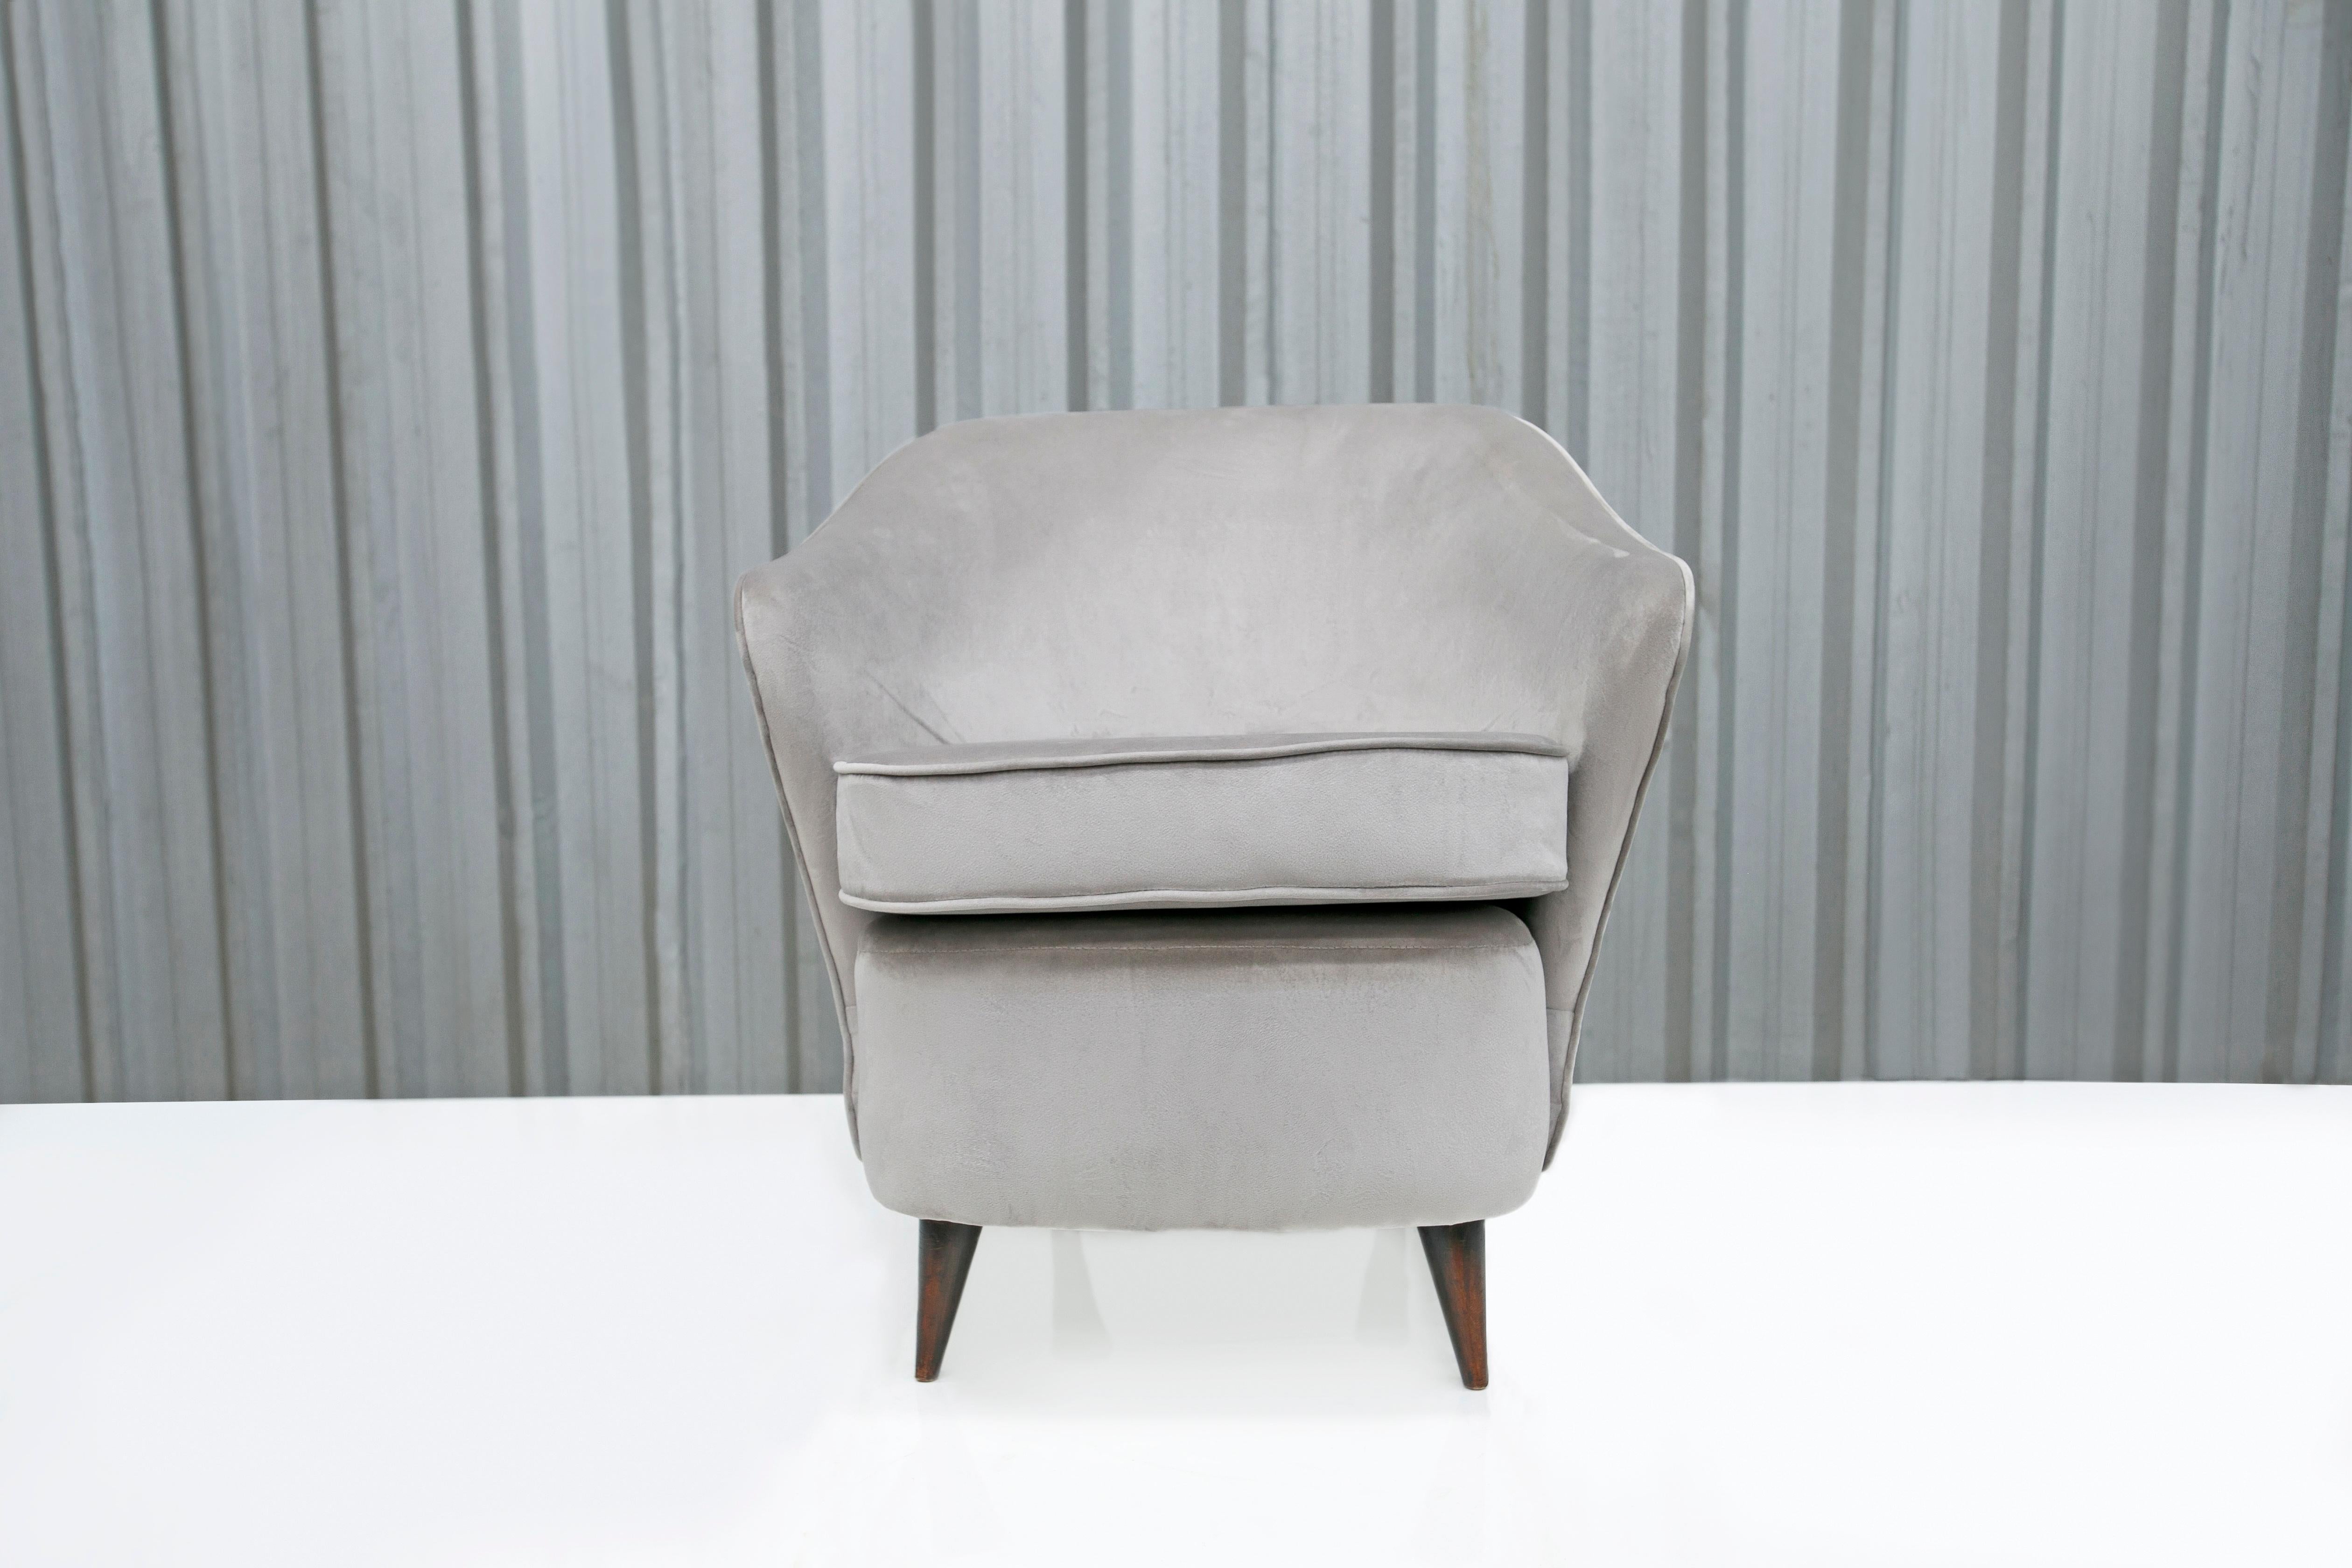 This thick armchair is made with a wooden frame and a soft gray fabric. The legs of the chair are slim, which is a common theme in Brazilian modern armchairs. The cushions are super soft and make the chair very comfortable. This chair is very old